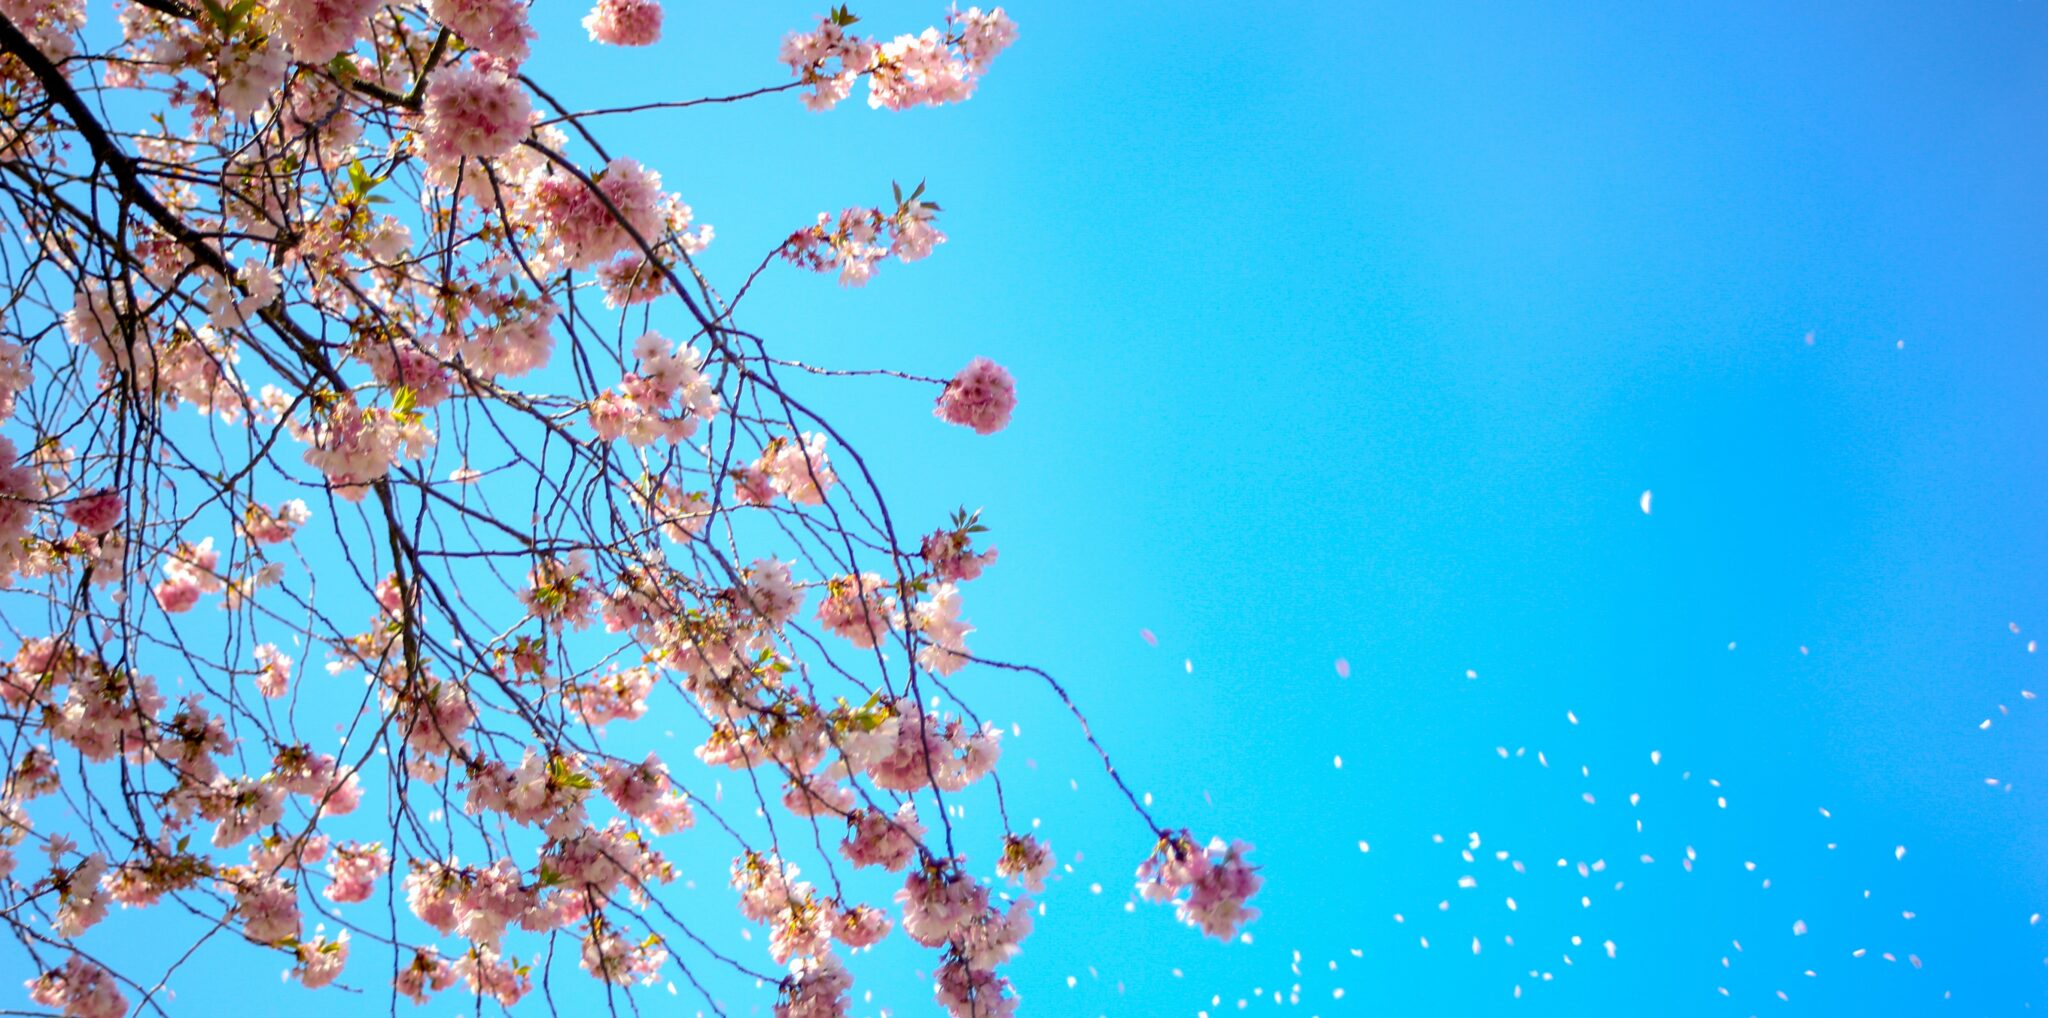 Pink blossoms against a bright blue sky